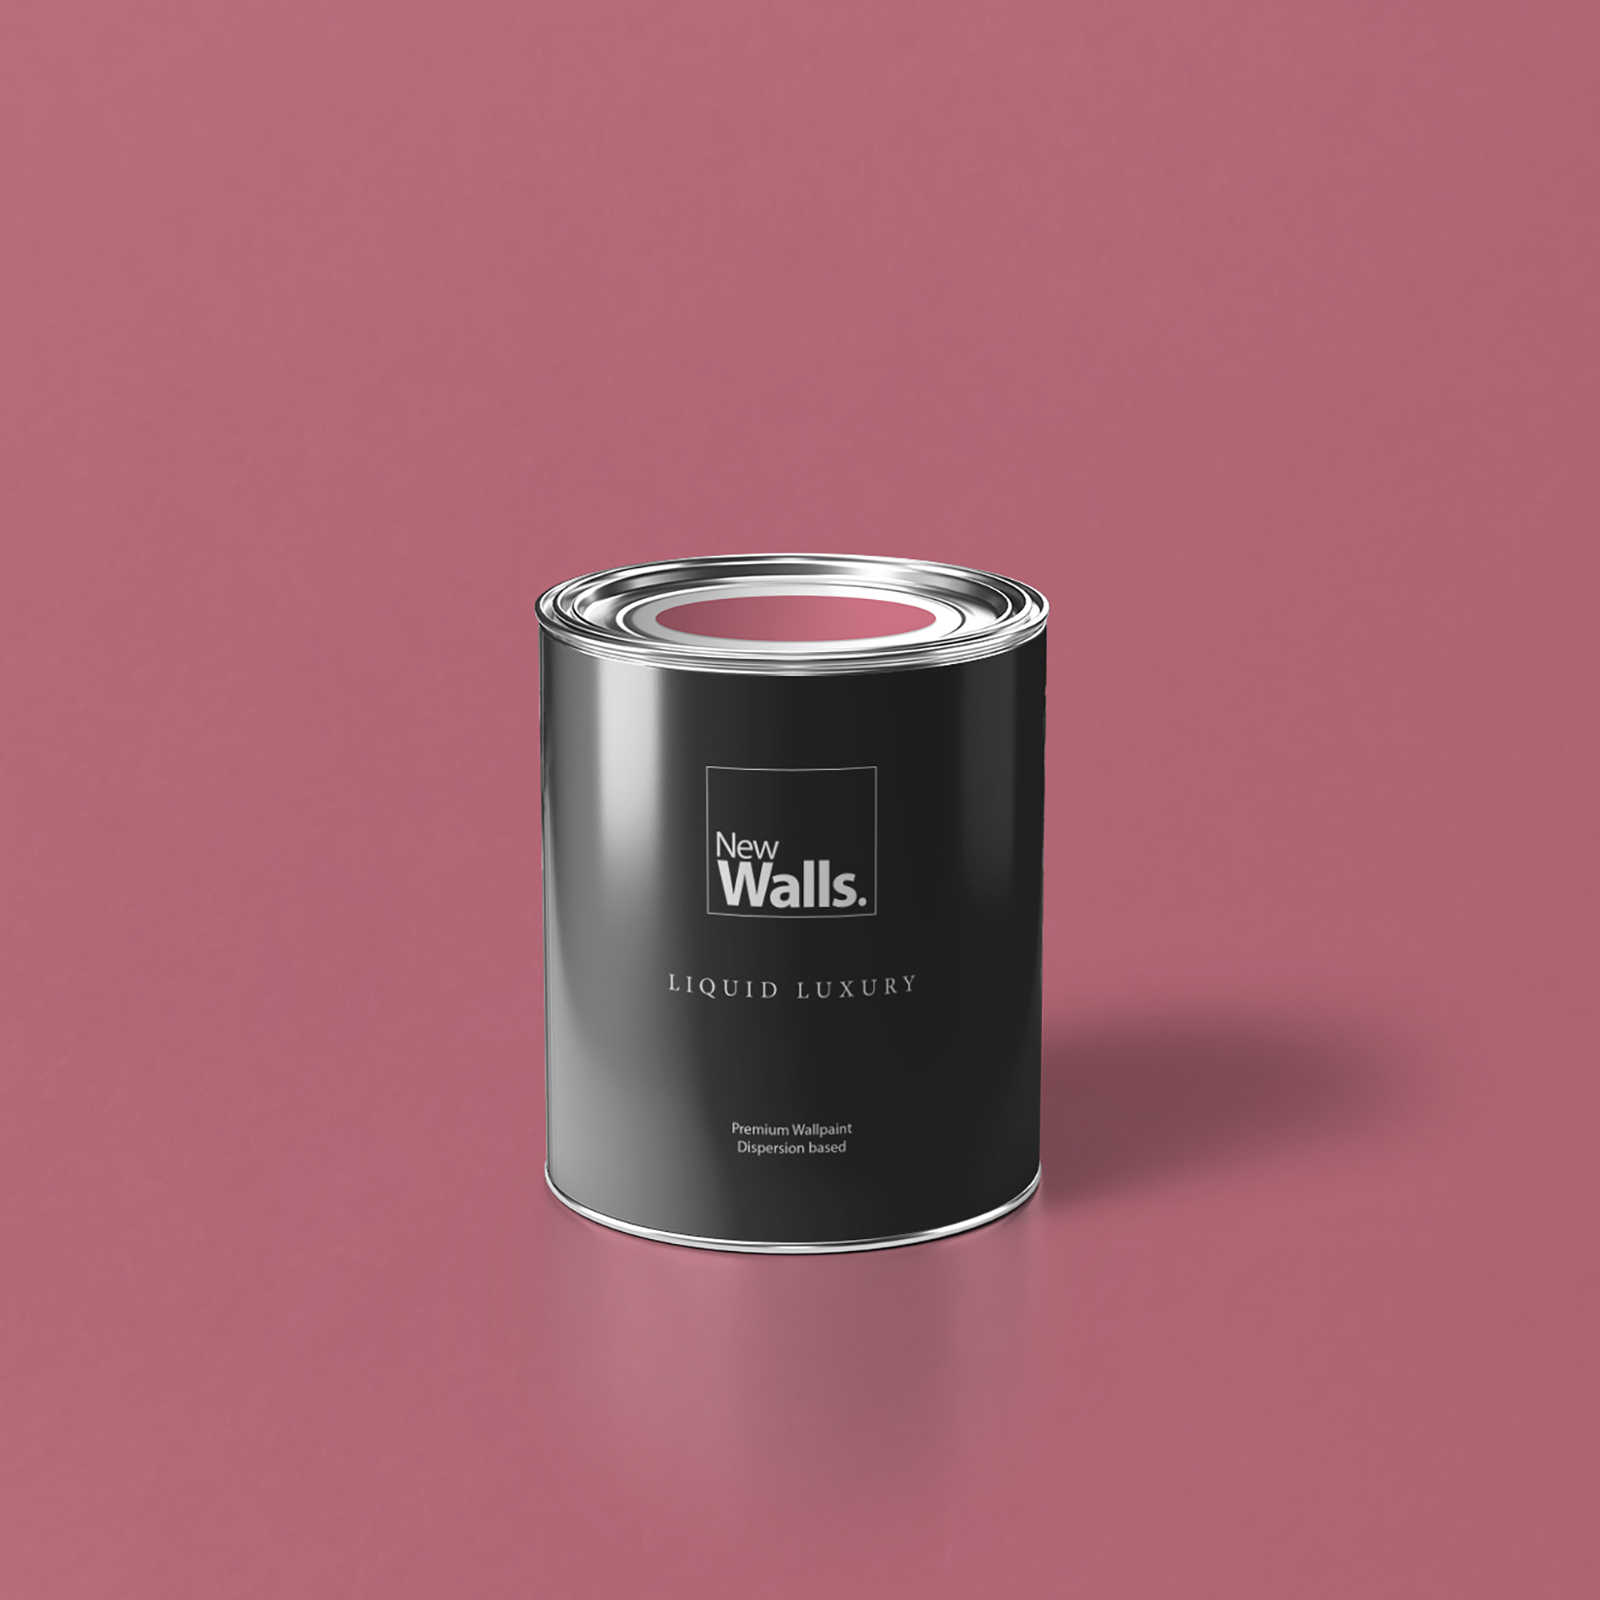         Premium Wall Paint Refreshing Dark Pink »Blooming Blossom« NW1018 – 1 litre
    